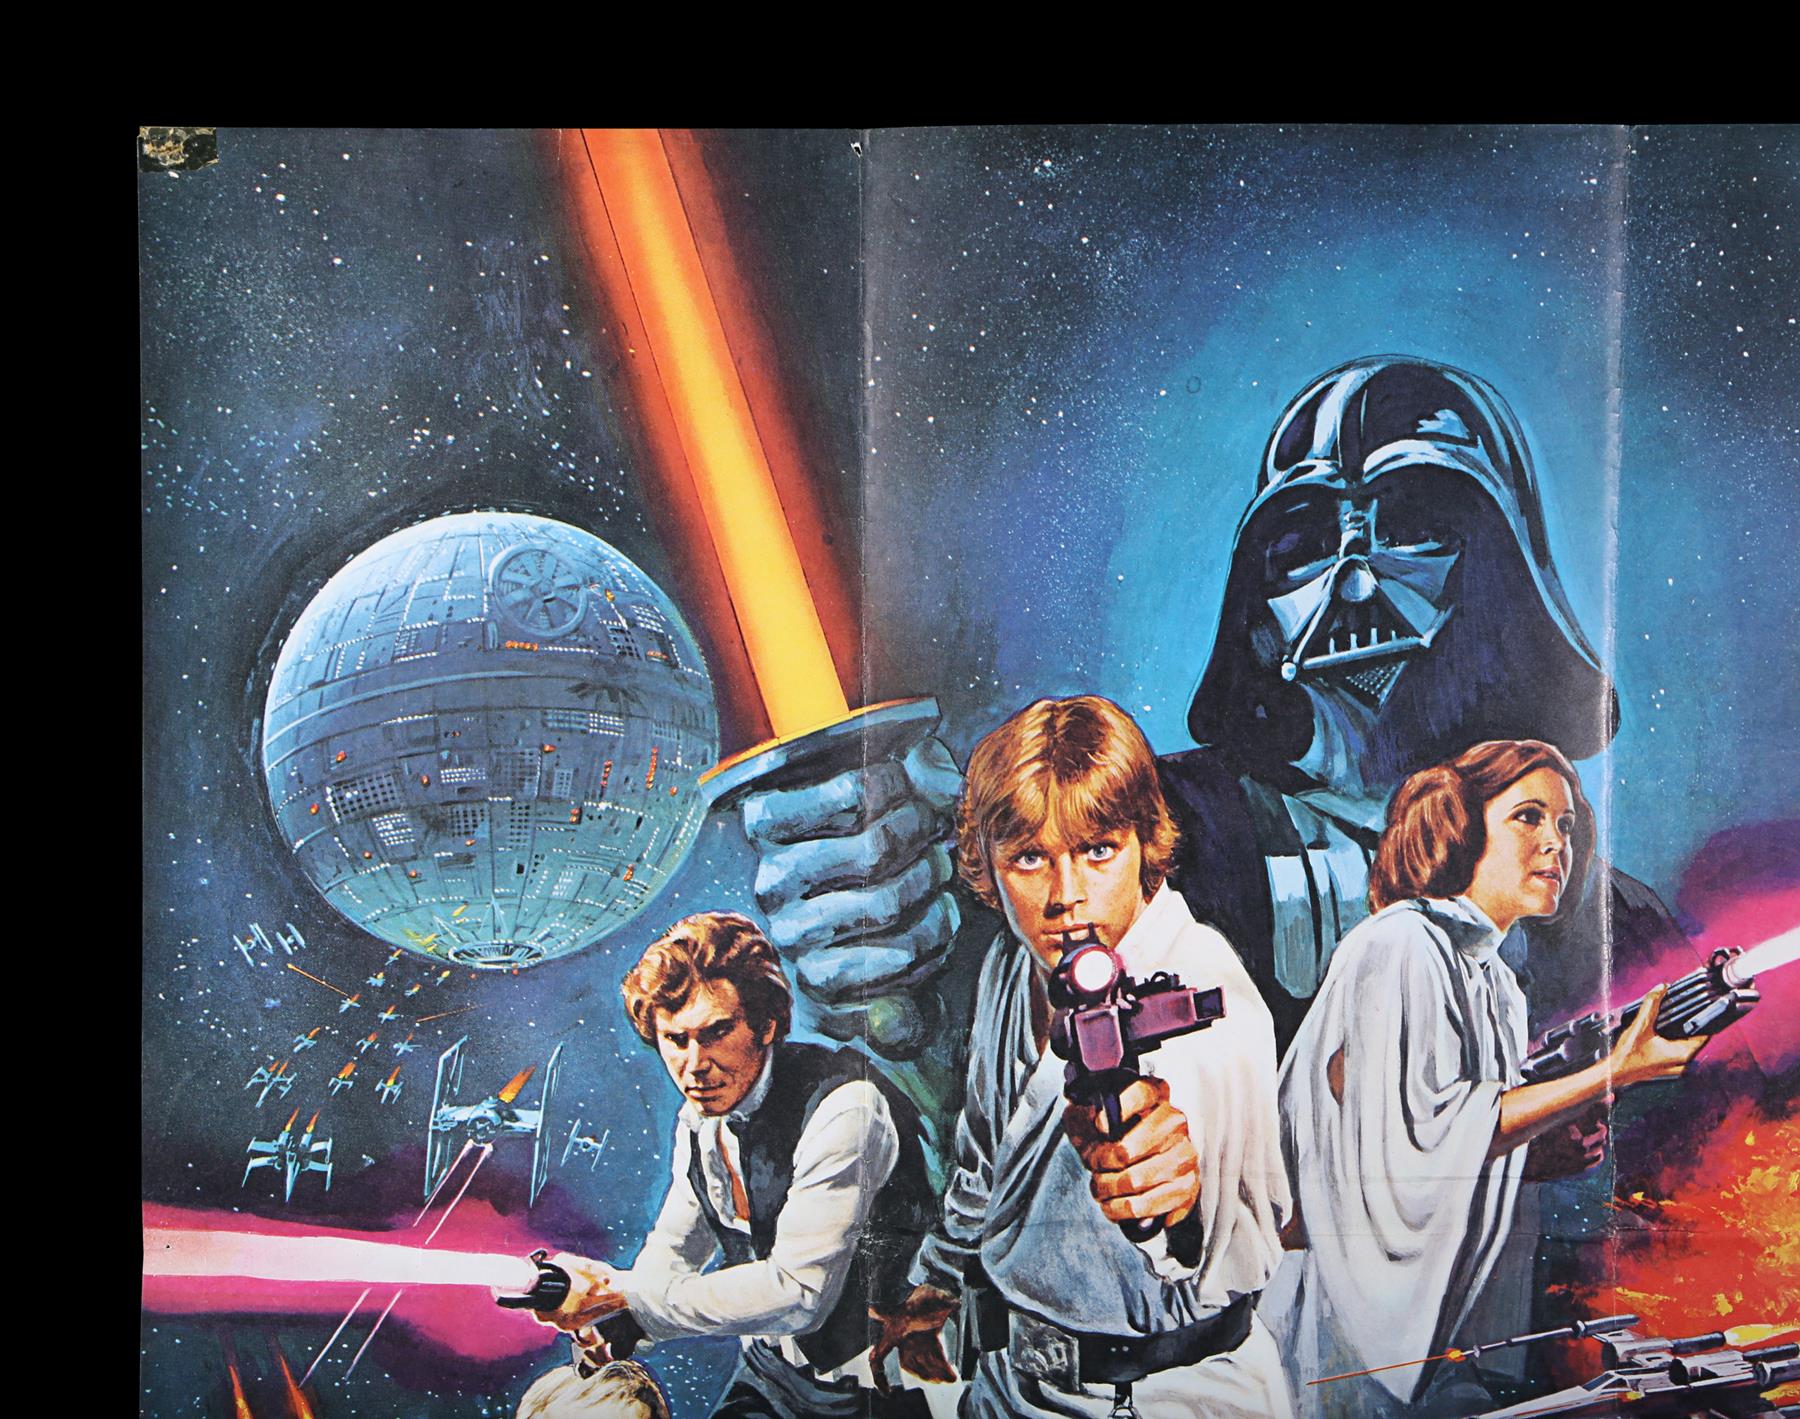 STAR WARS: A NEW HOPE (1977) - UK Quad Poster "Style C" Awards Style, 1977 - Image 2 of 7